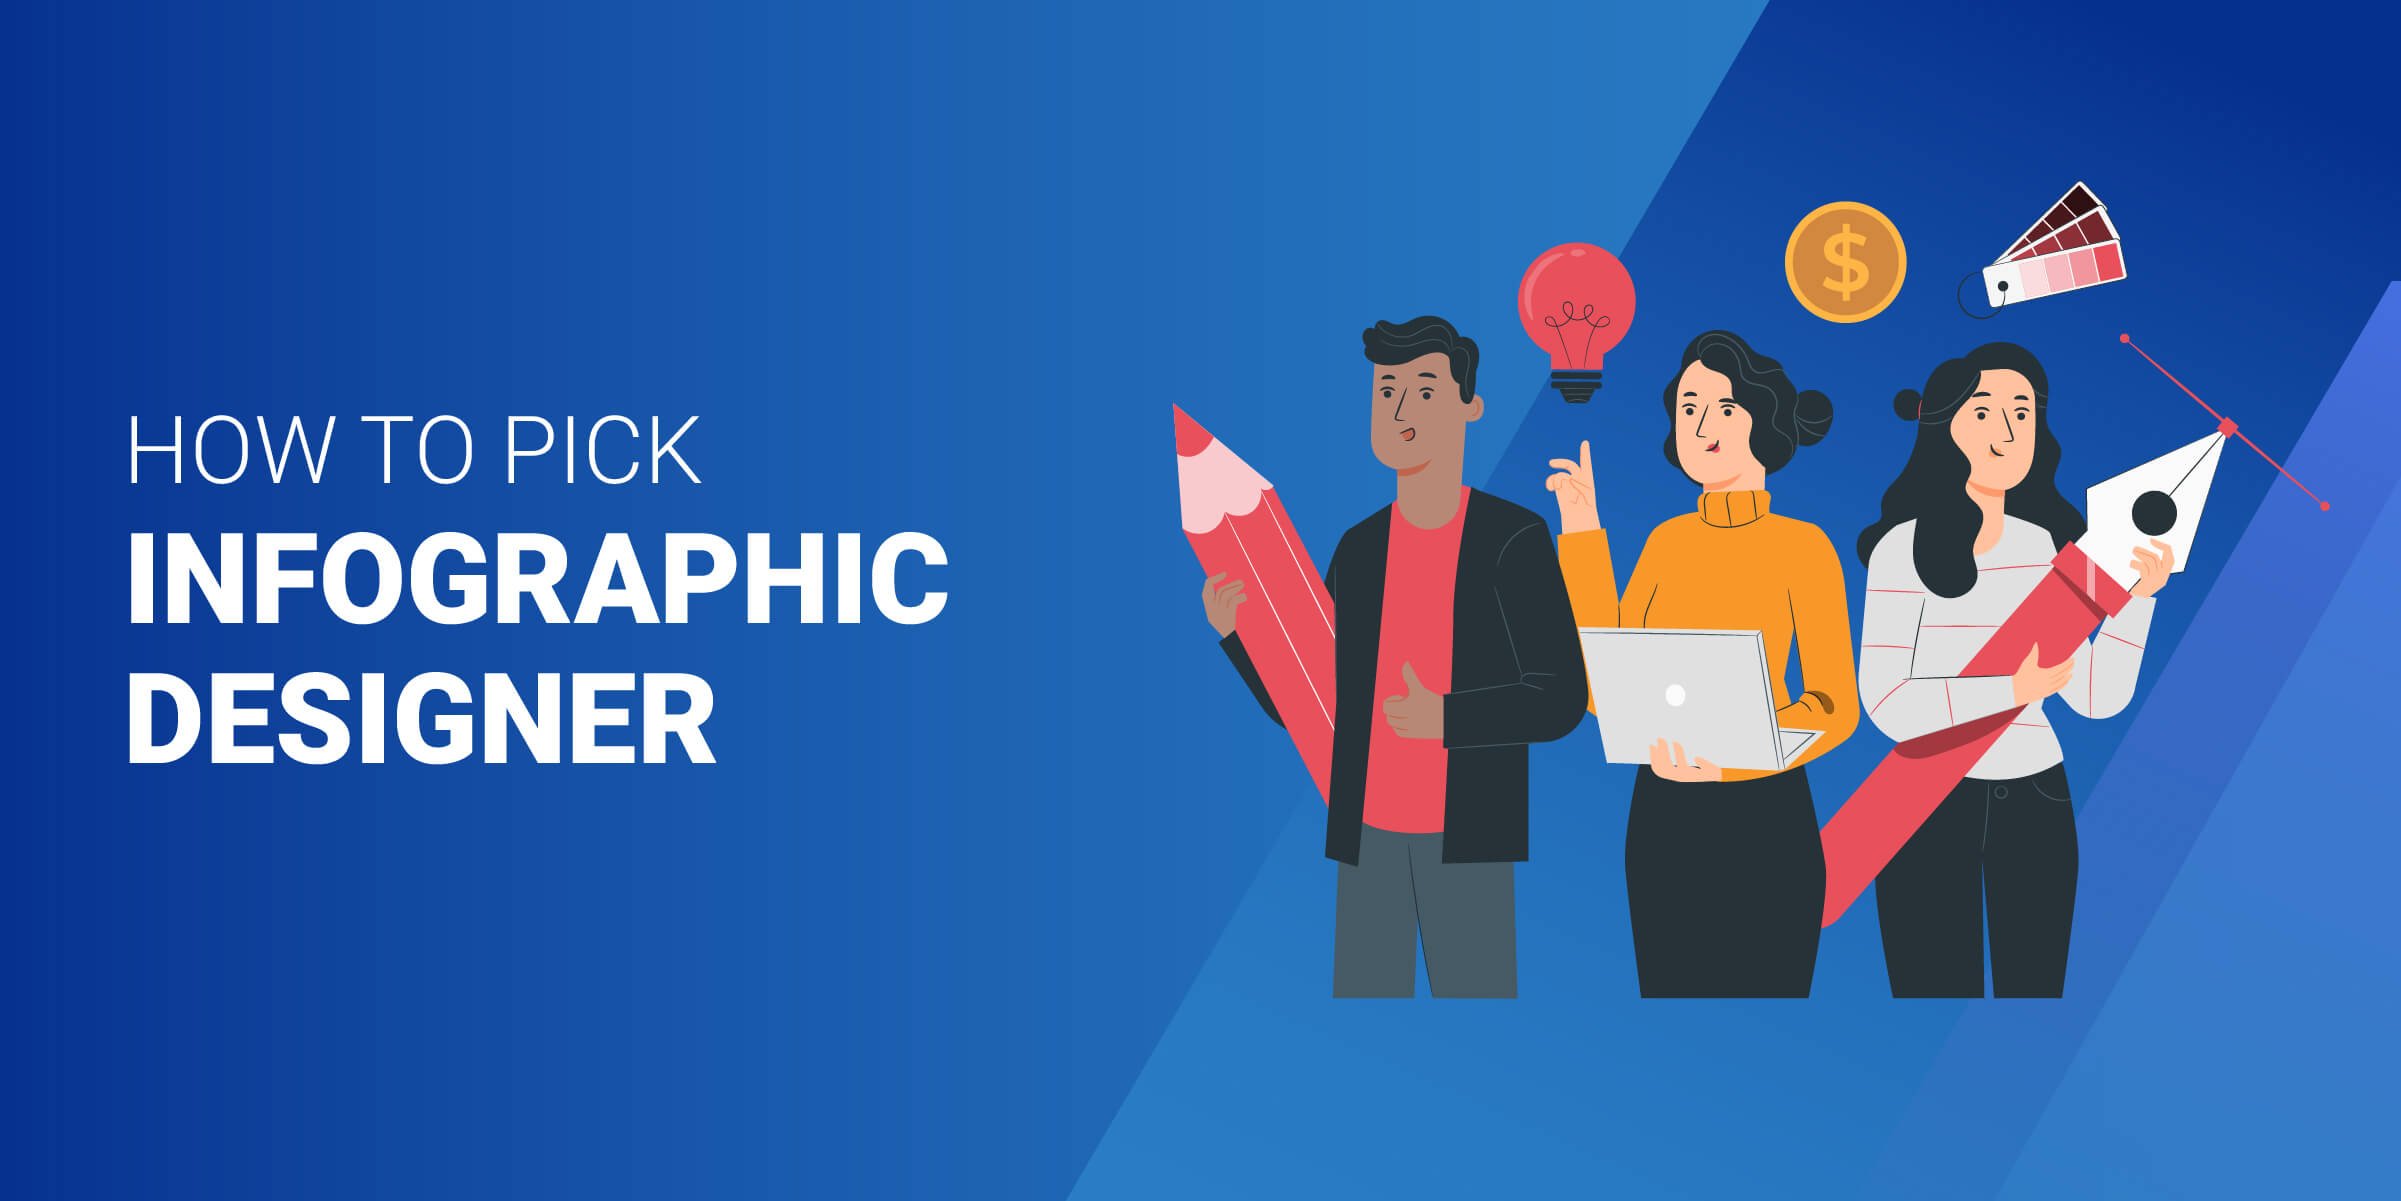 How to Hire Infographic Designer